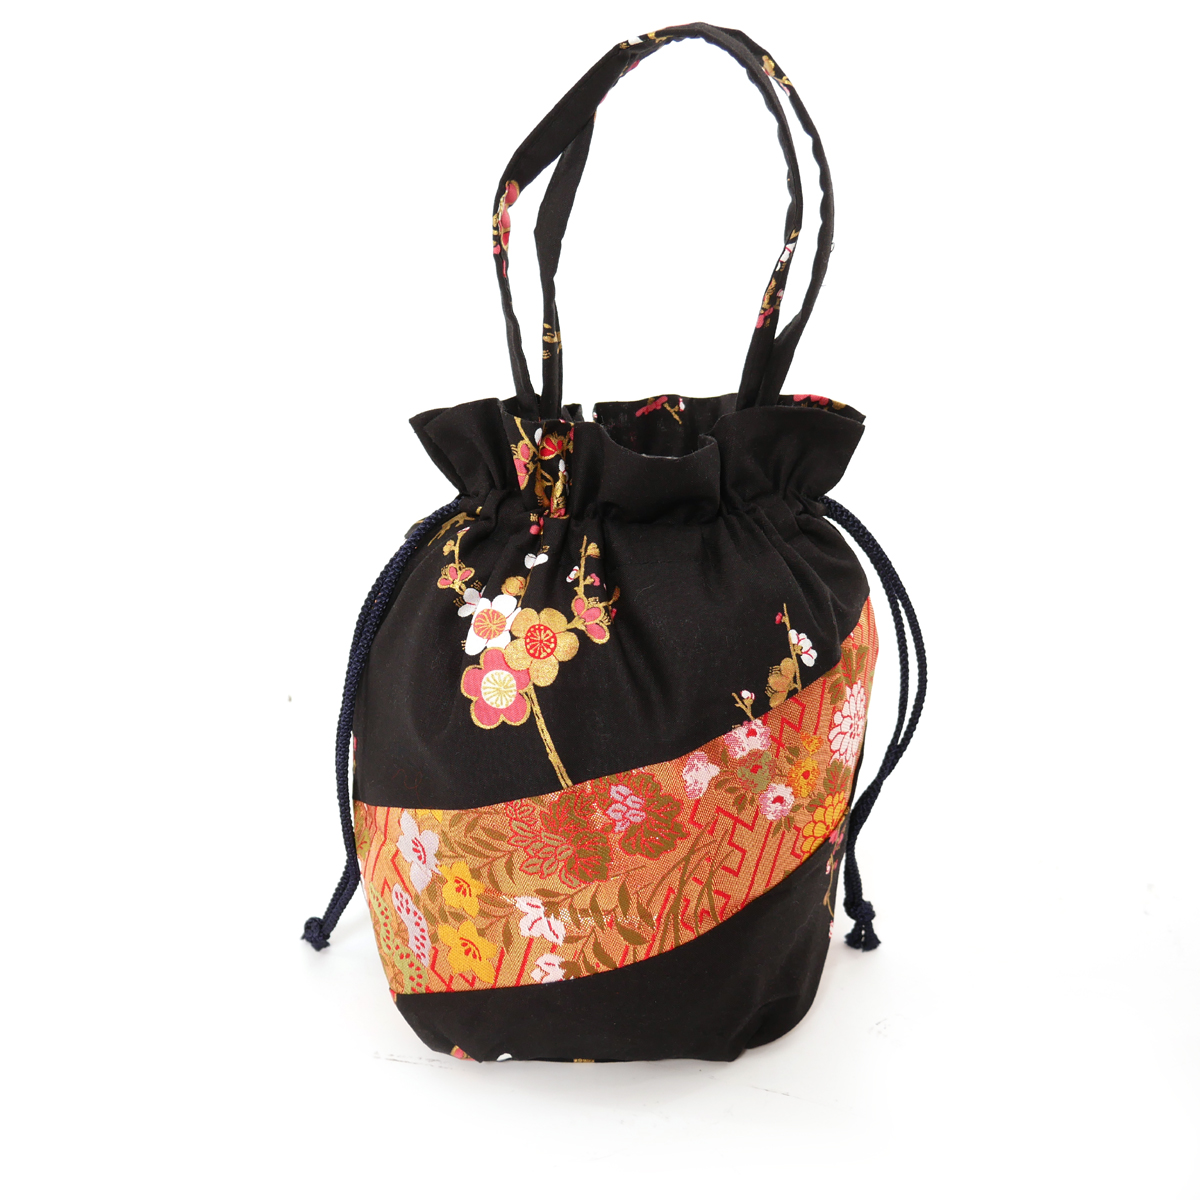 Black traditional Japanese style kimono bag in polyester cotton